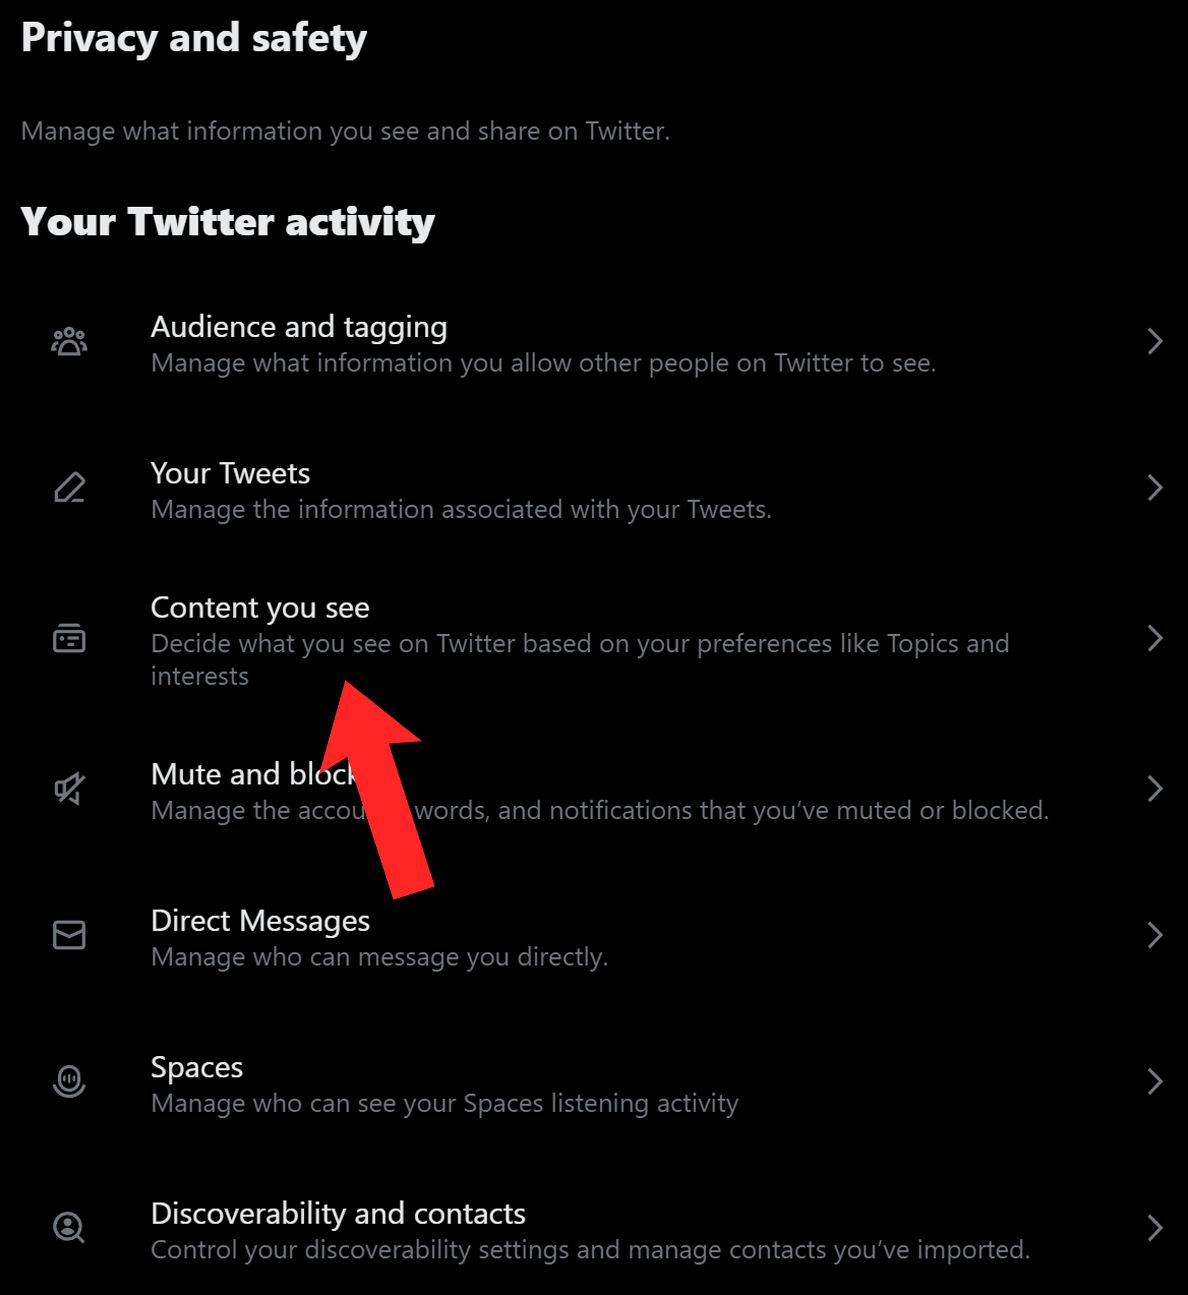 How to Turn Off Sensitive Content on Twitter (Updated [date])